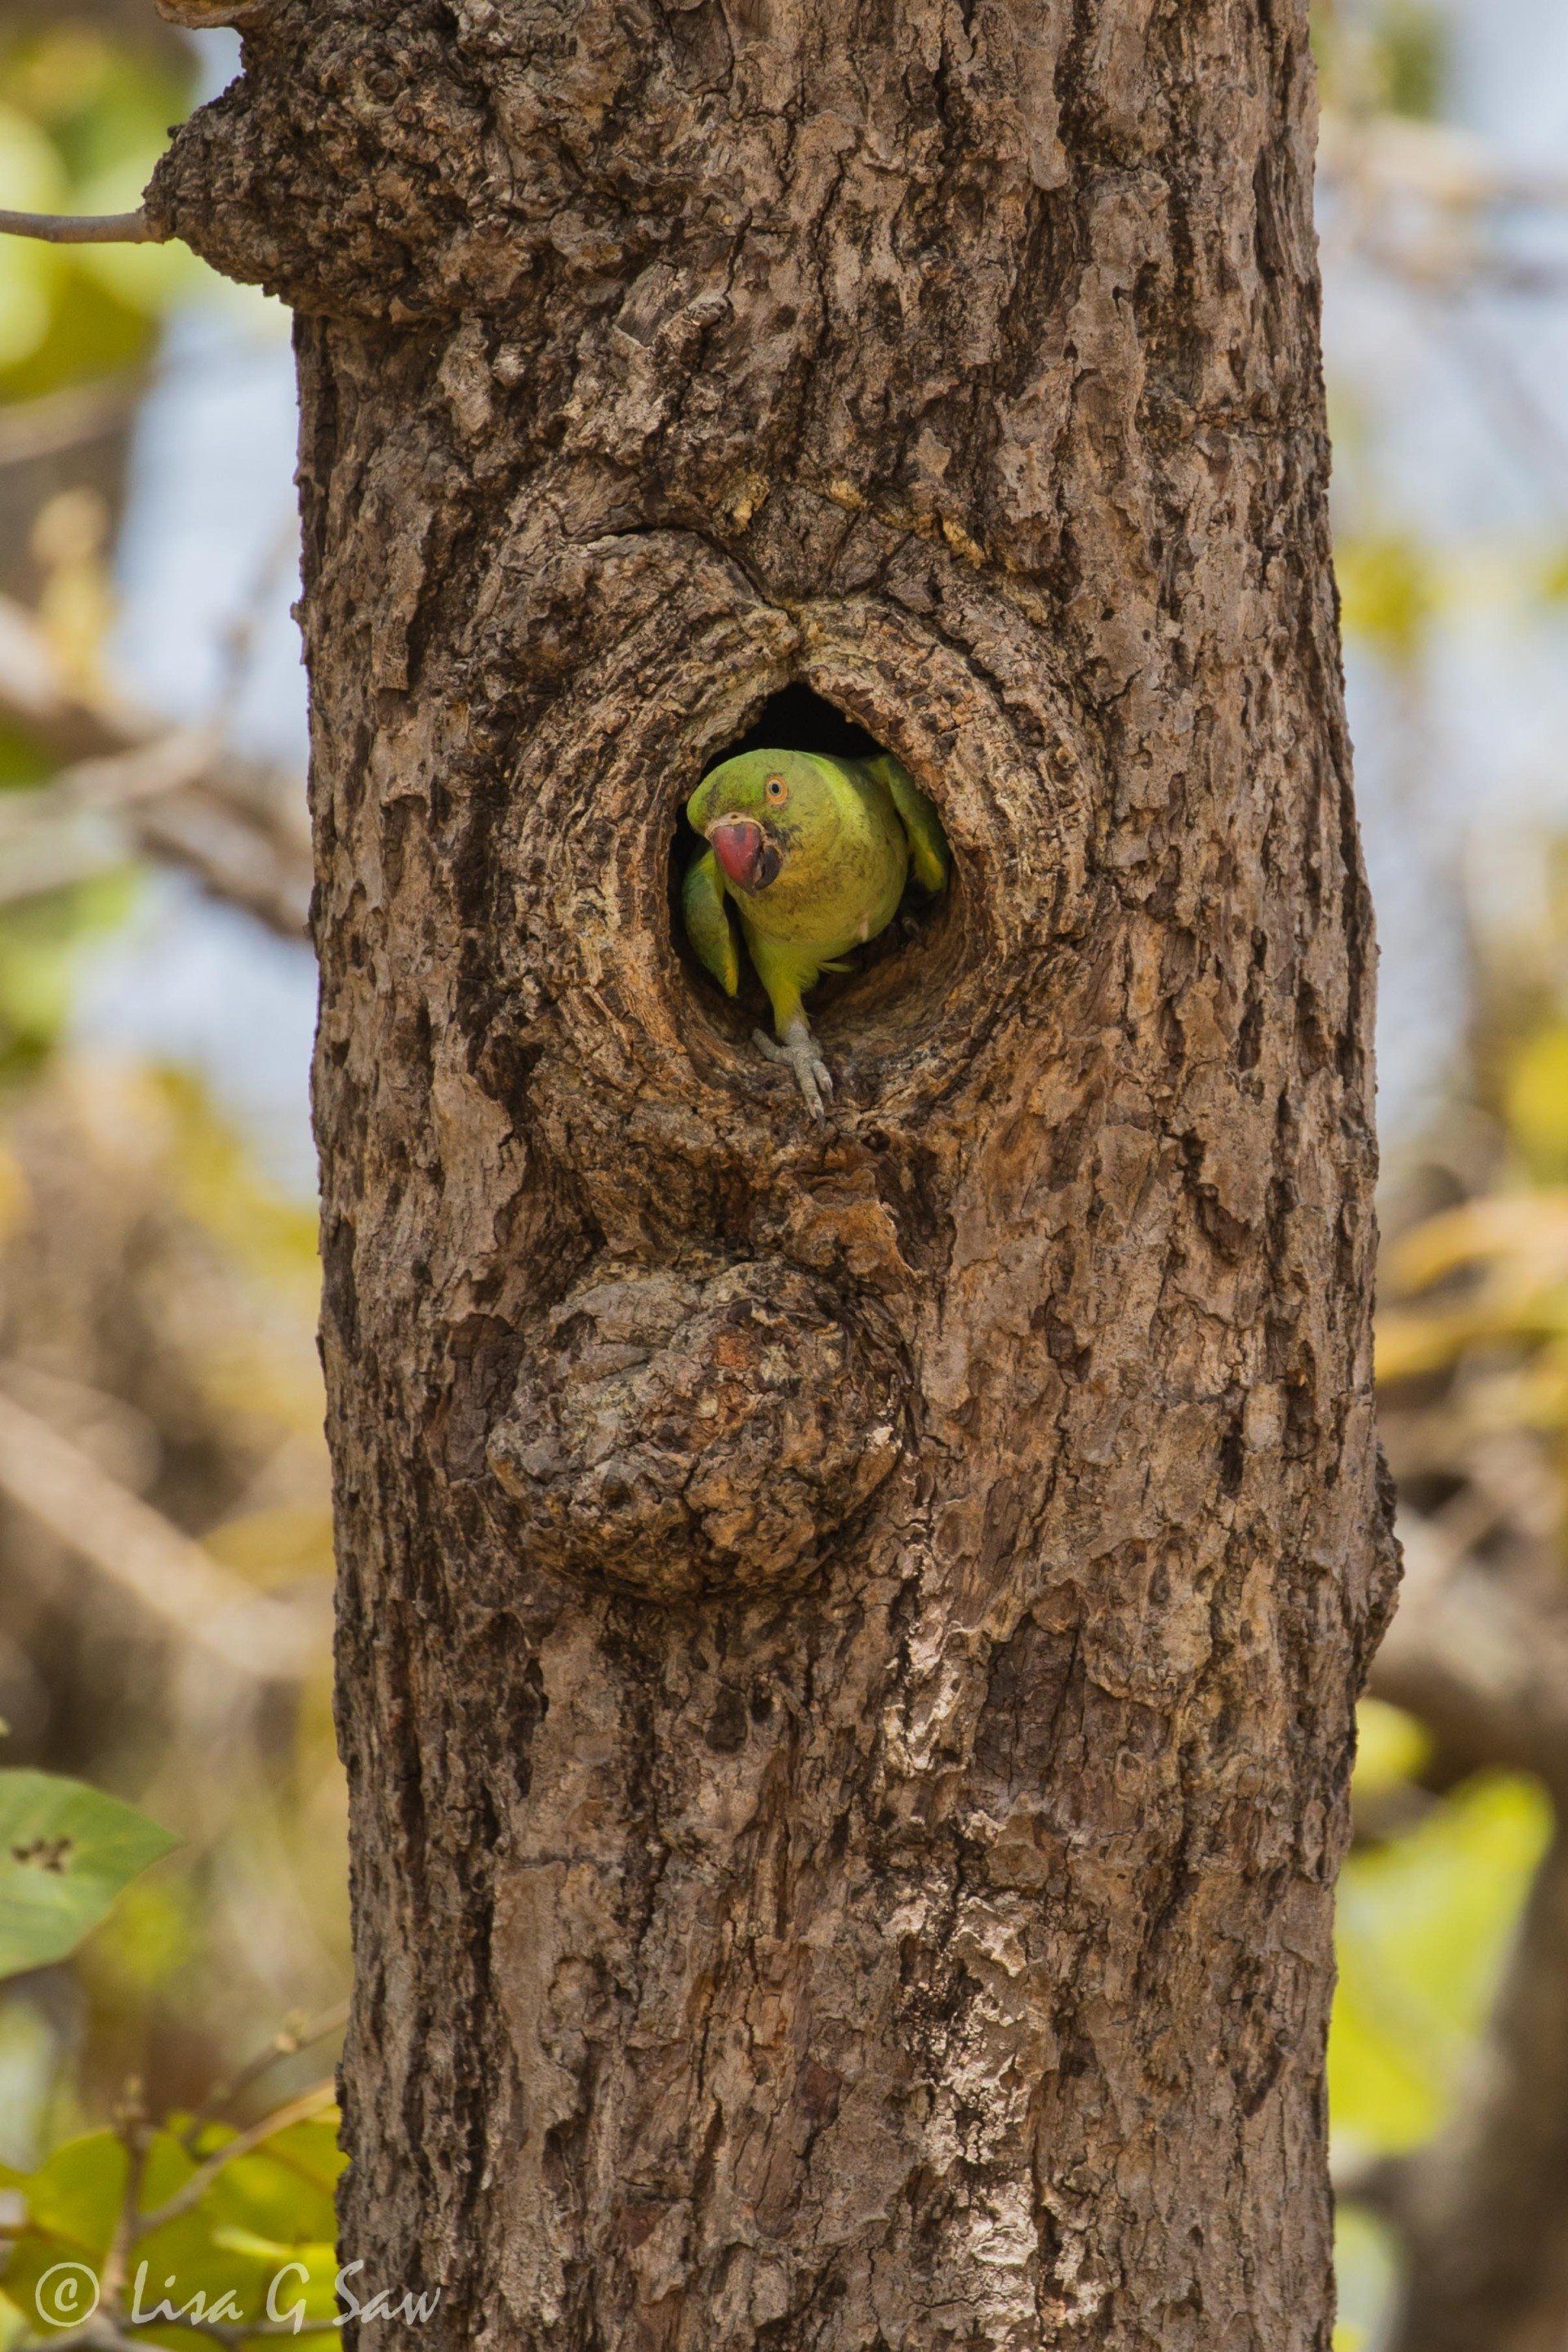 Green bird appearing out of hole in tree